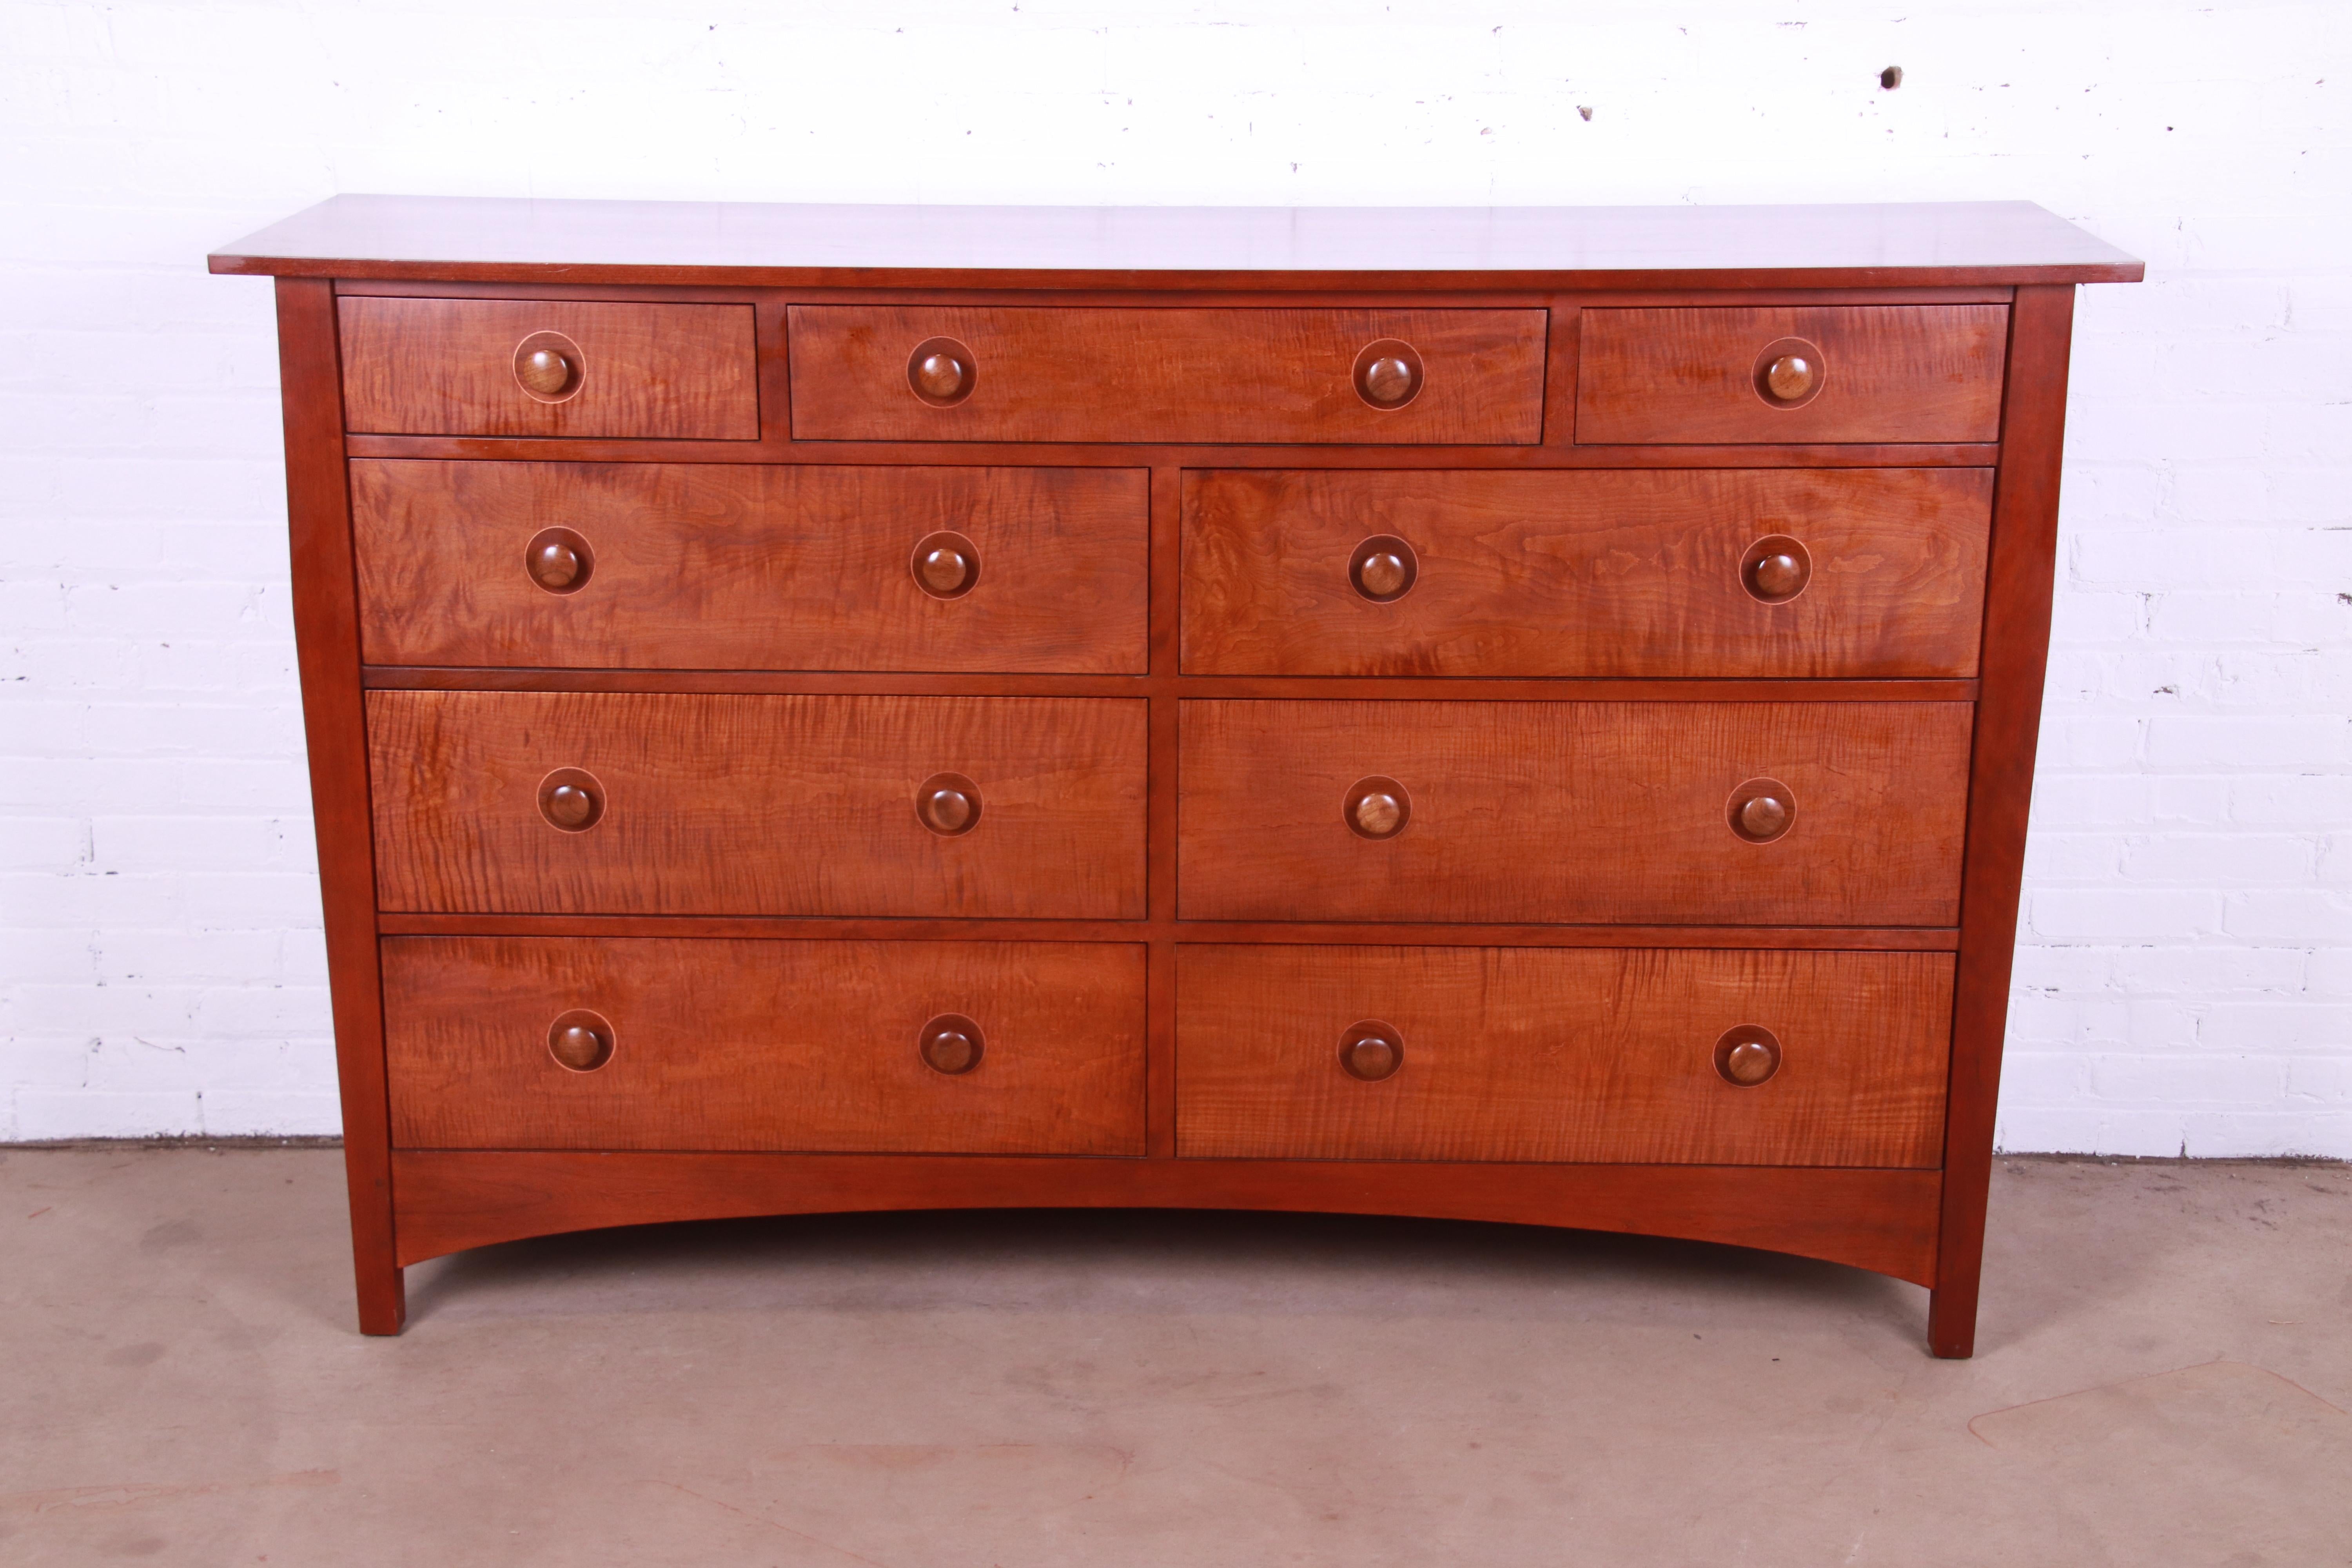 A gorgeous Mission or Arts & Crafts style nine-drawer dresser chest

By Stickley, 